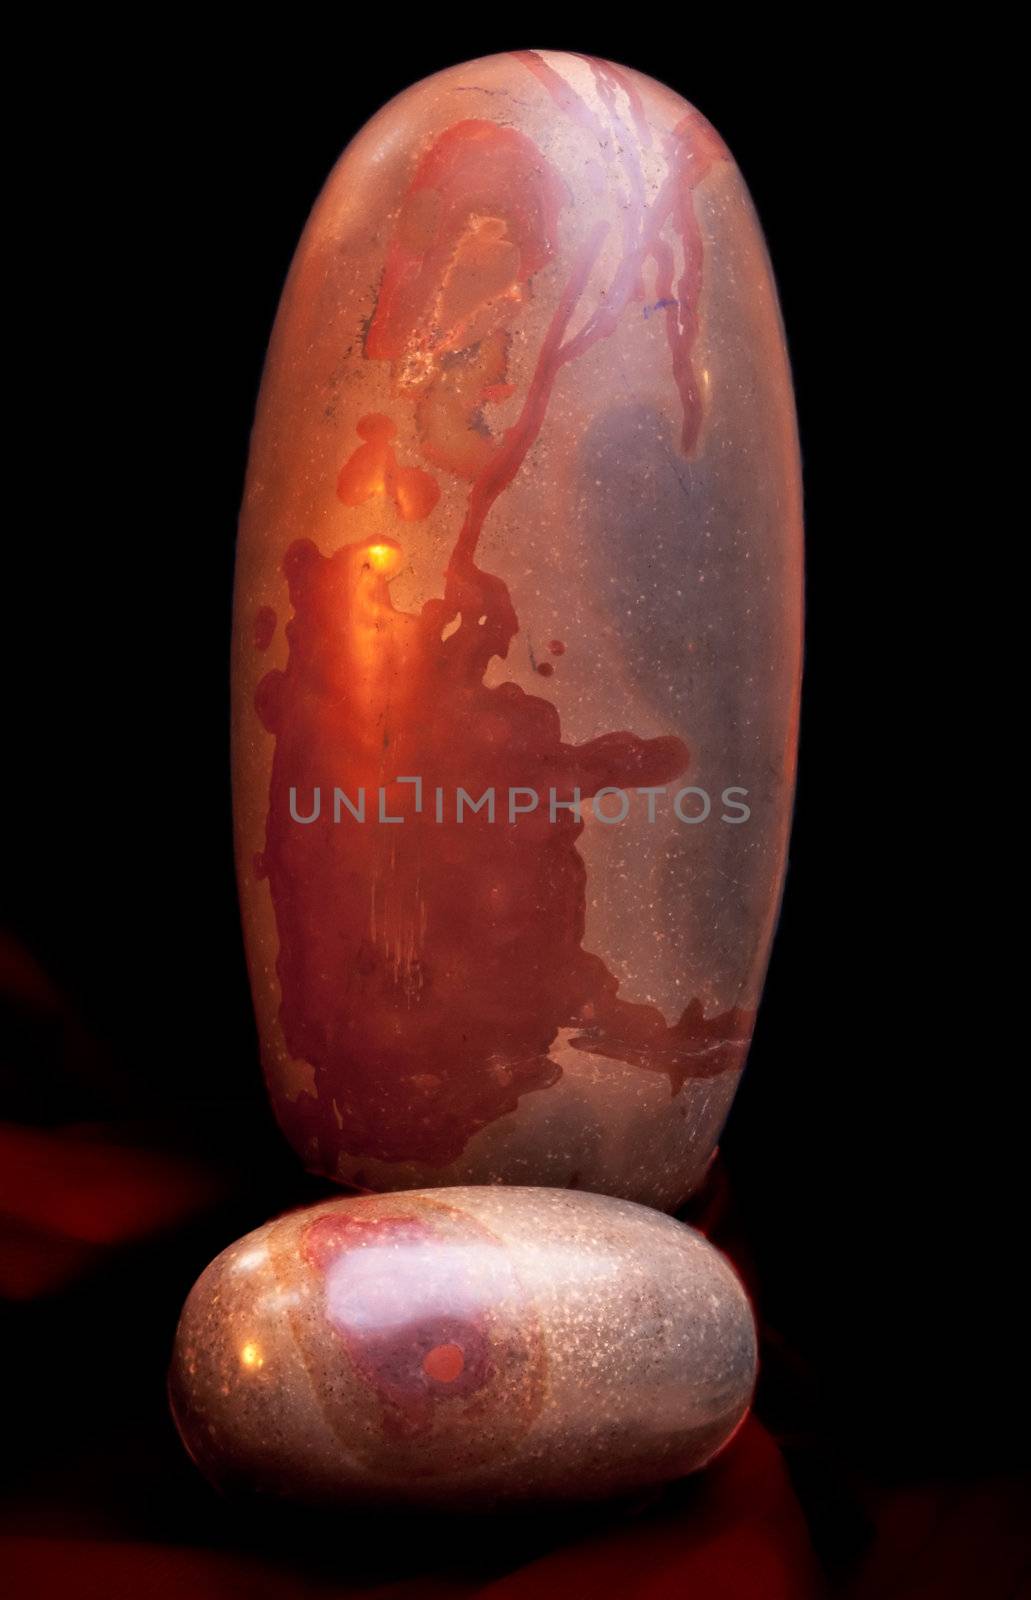 Tantric Lingam stones from Narmada River in India by PiLens